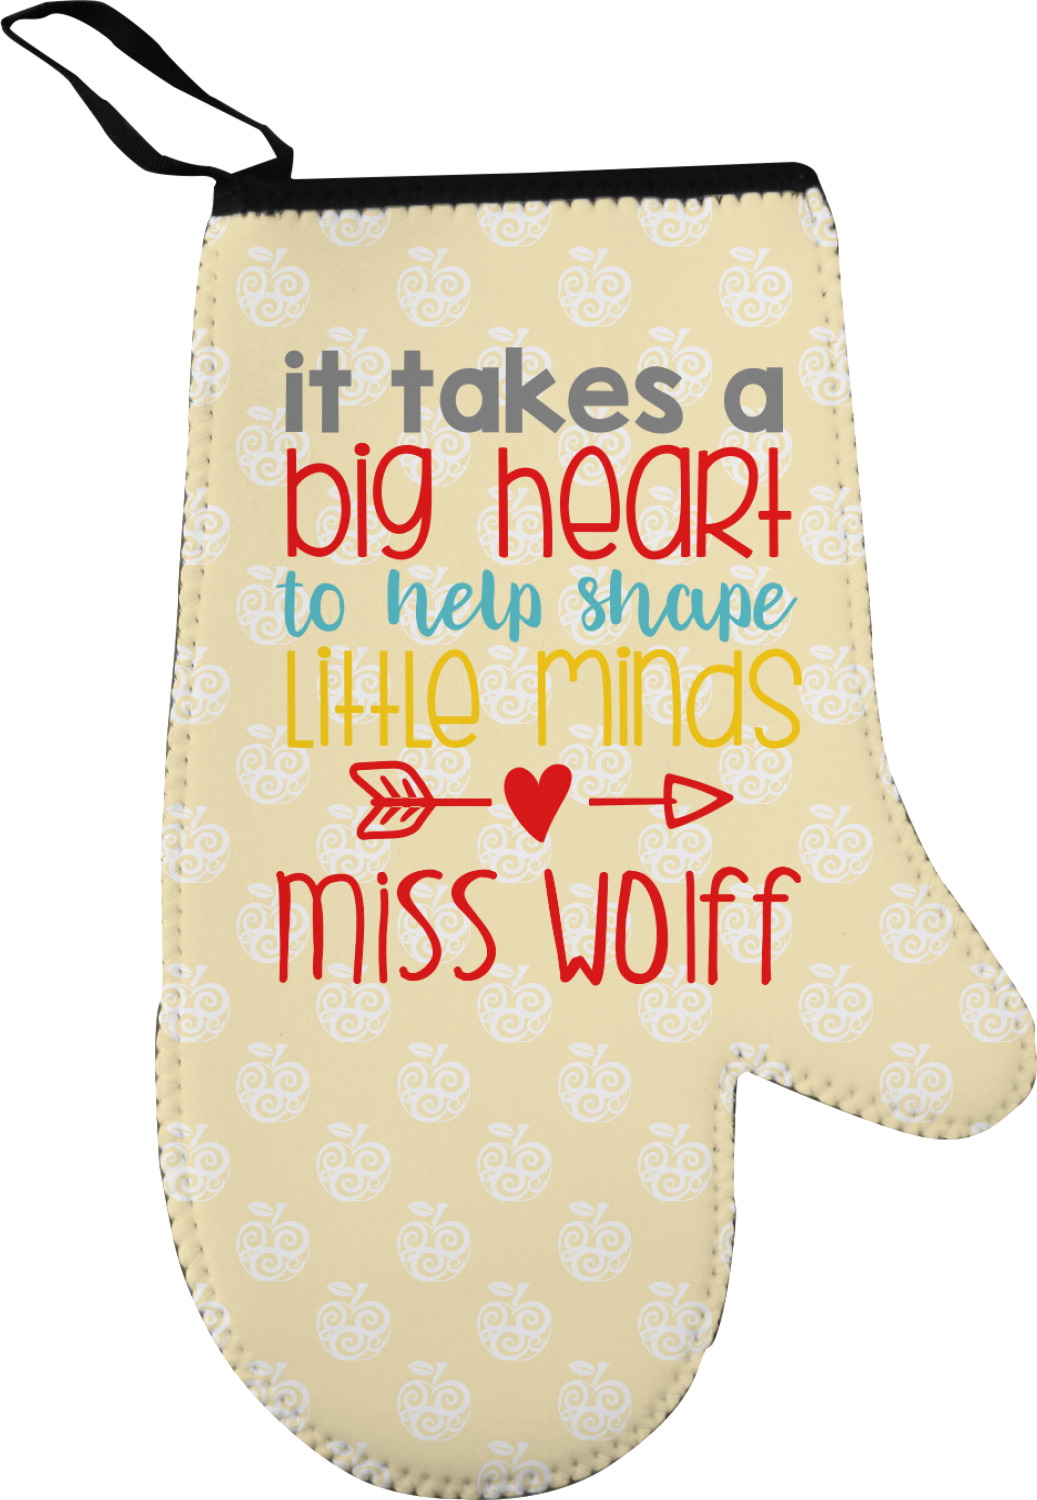 https://www.youcustomizeit.com/common/MAKE/1038343/Teacher-Quotes-and-Sayings-Personalized-Oven-Mitt.jpg?lm=1566251337